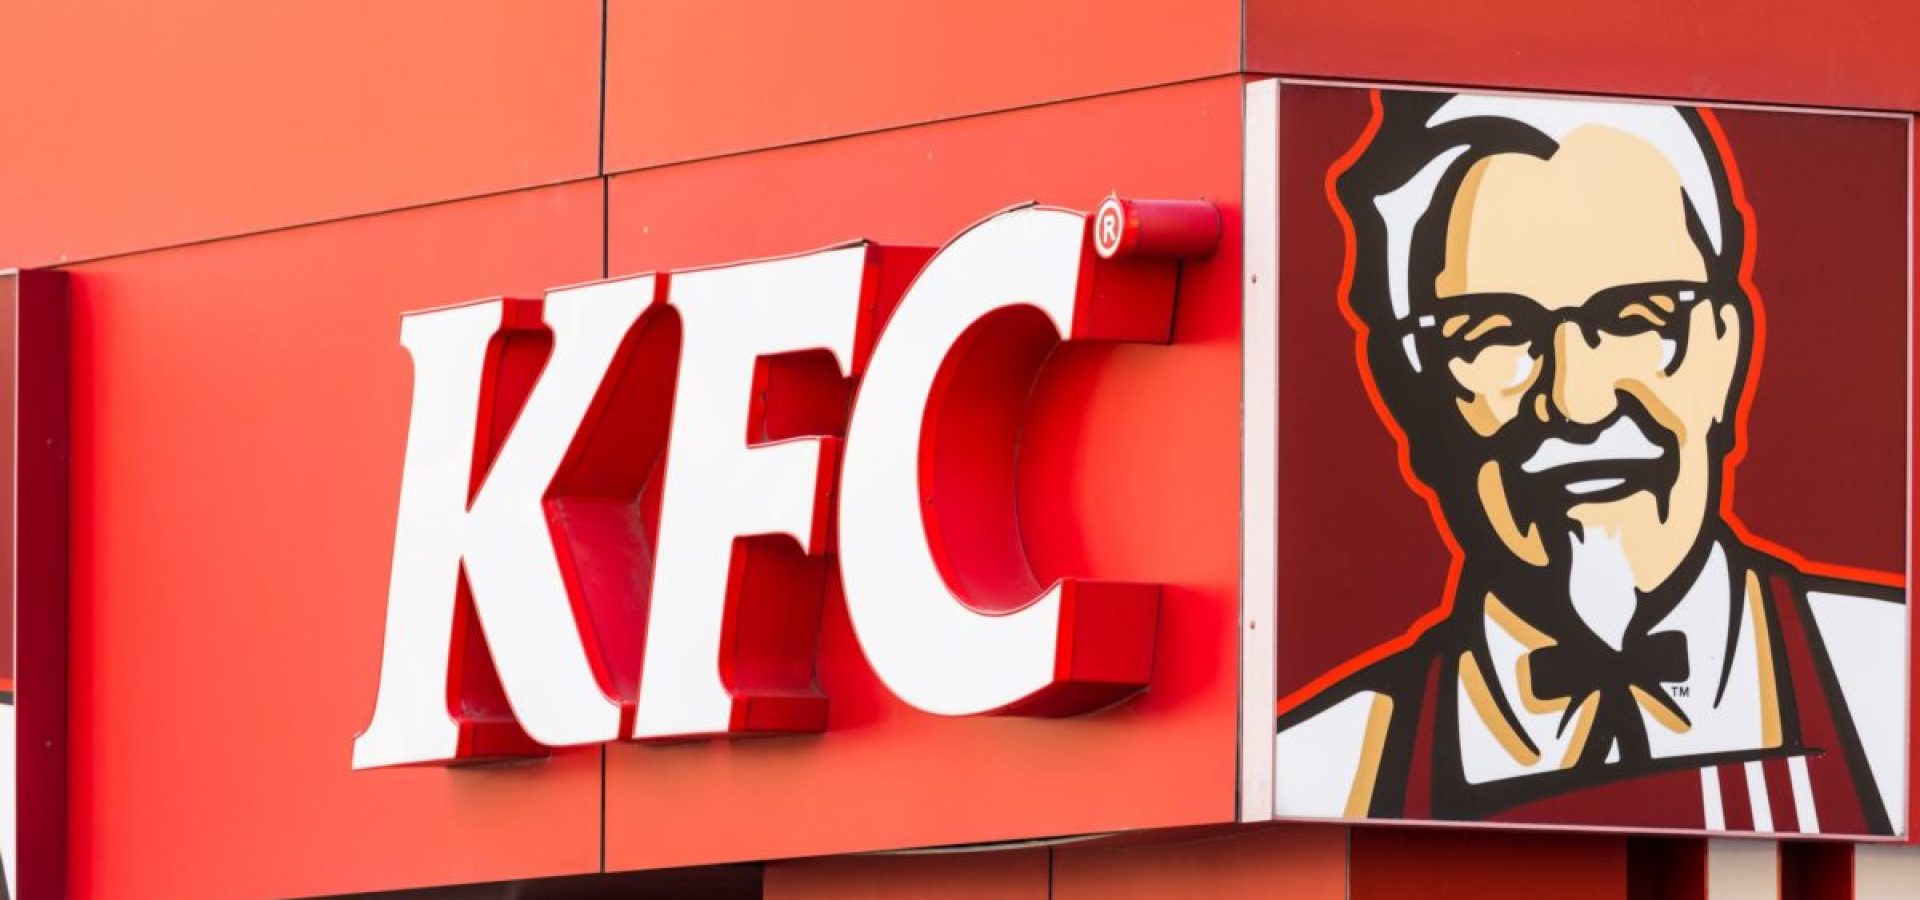 KFC and new opportunities